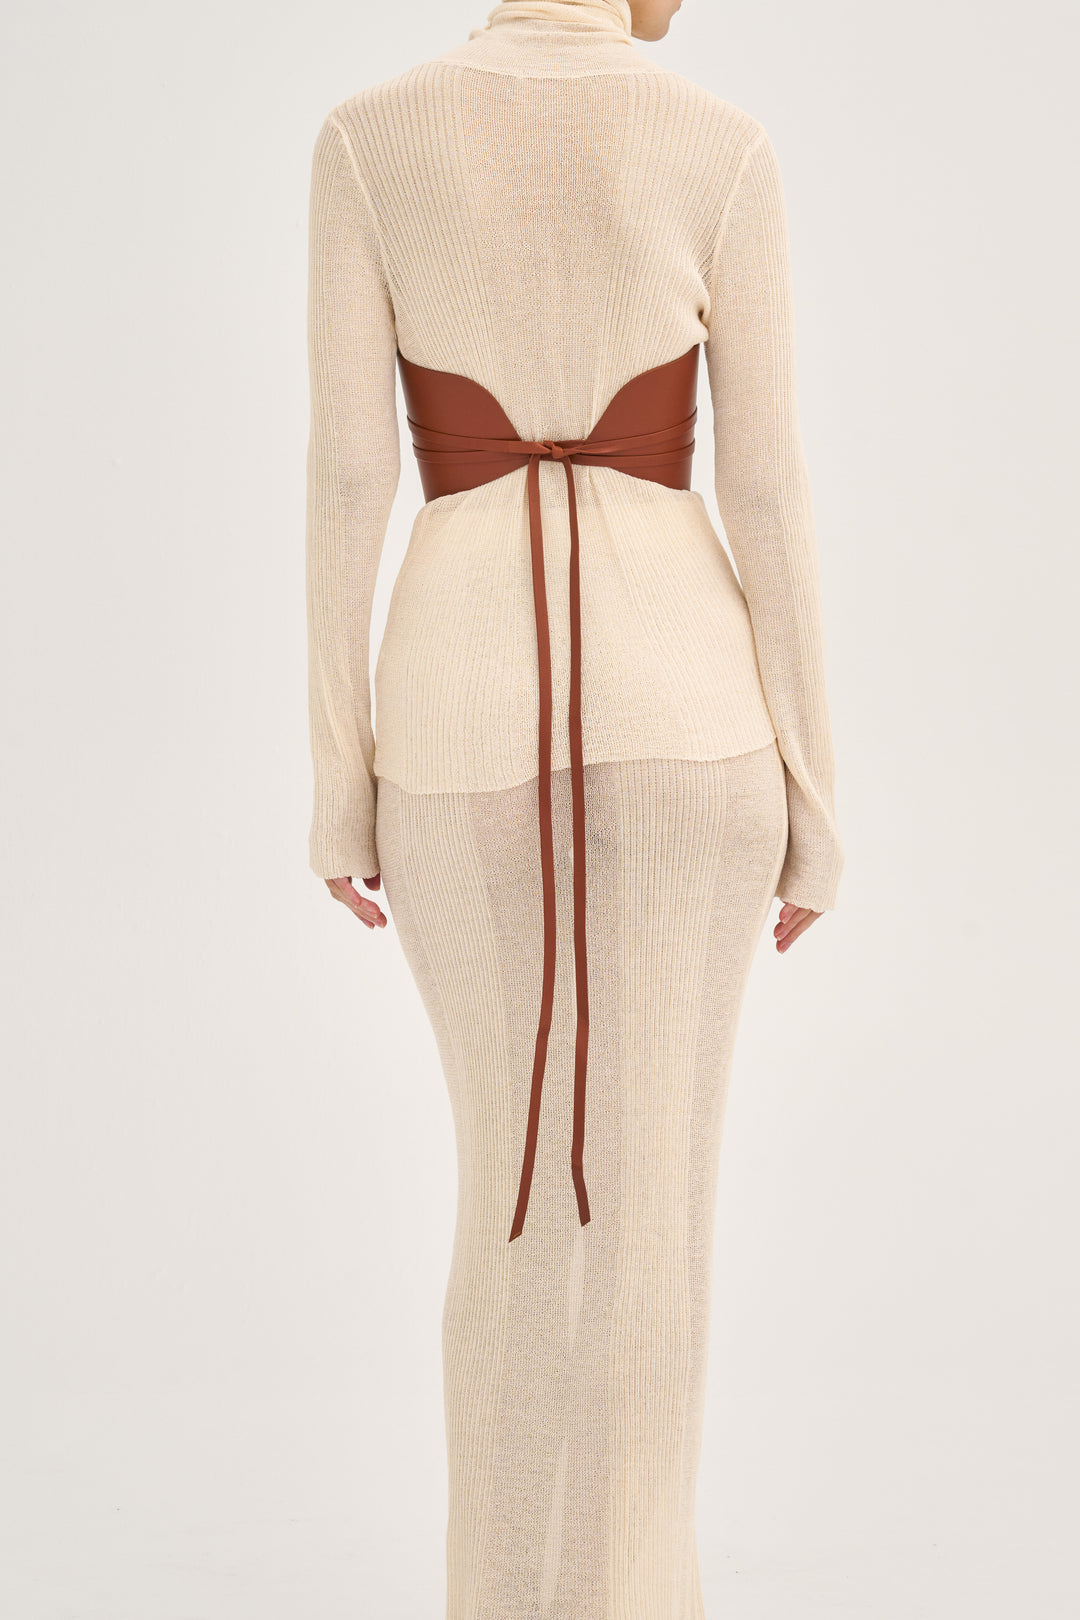 Déhanche Undone Corset in brown leather, paired with a cream knitted dress, showcasing a back view with elegant tie detailing.